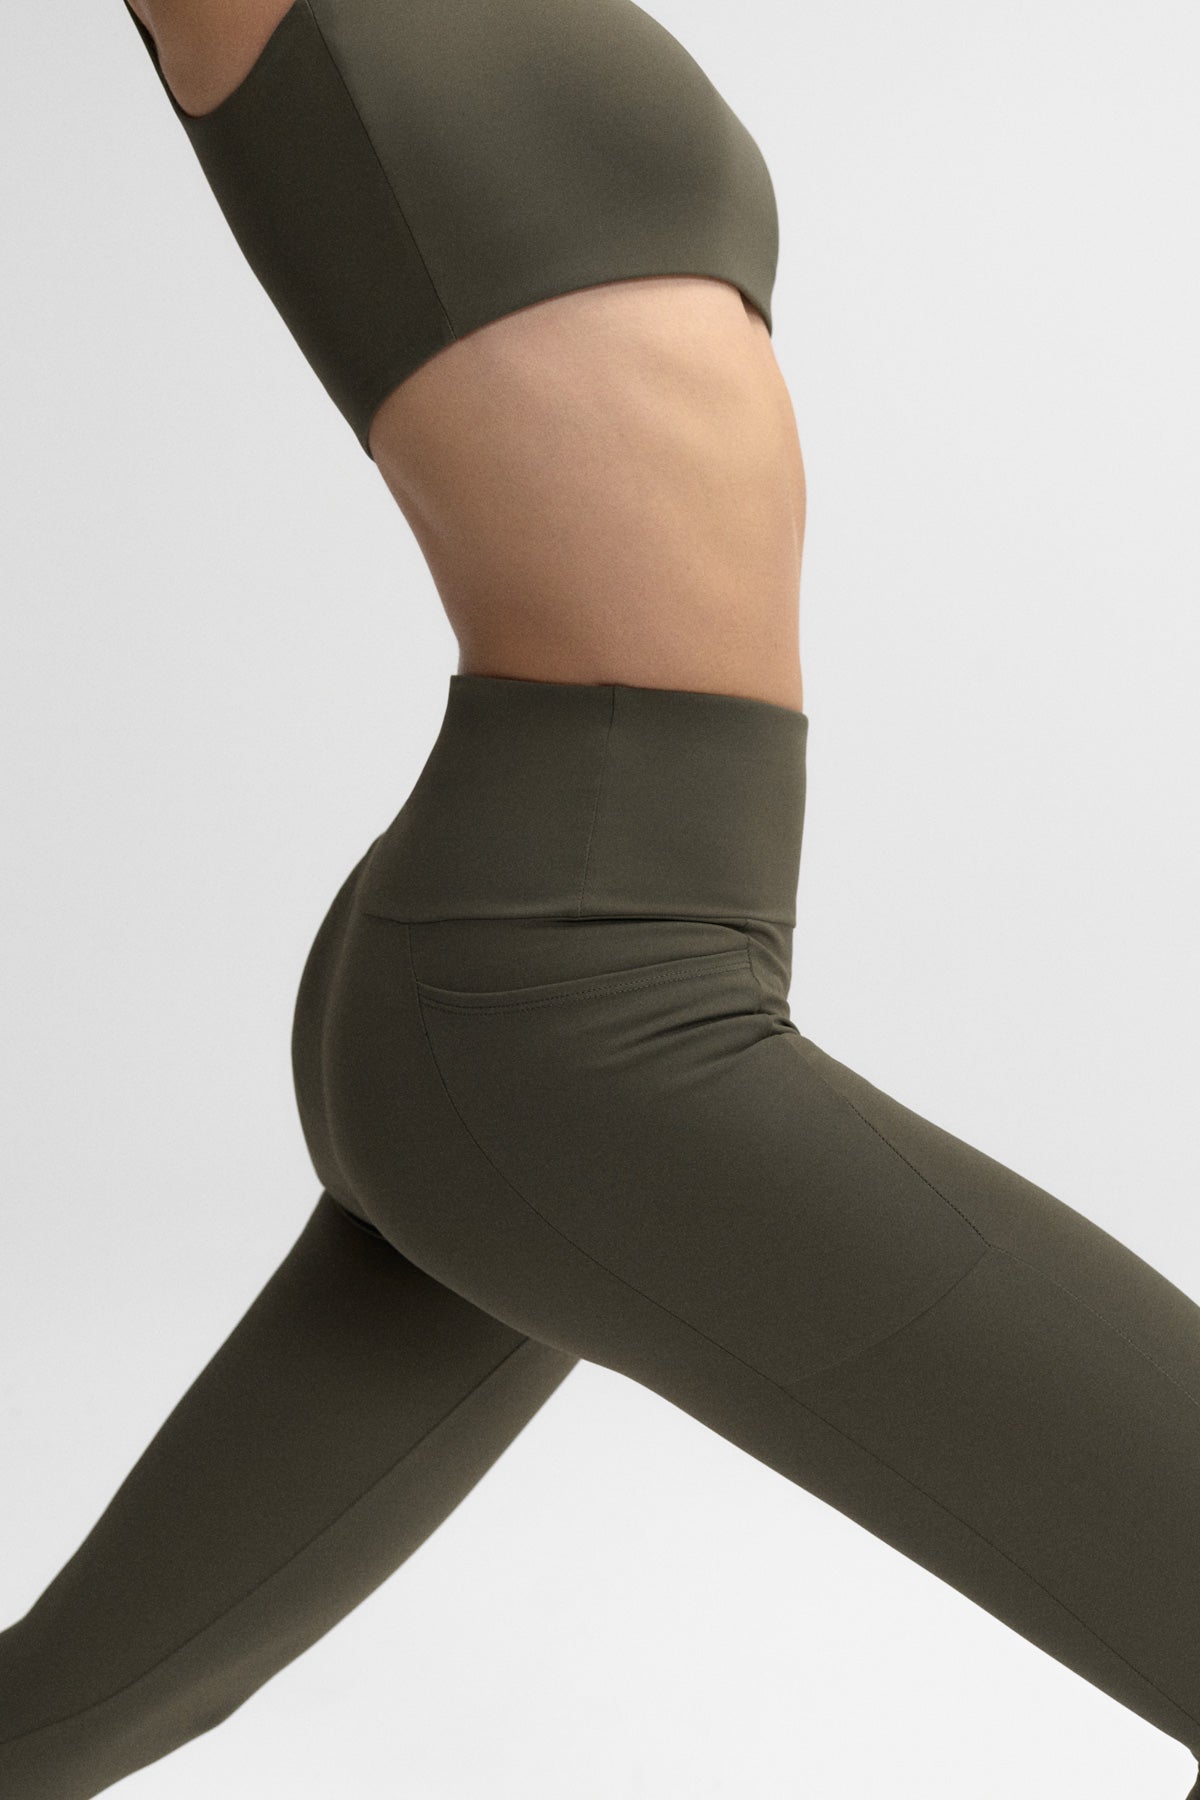 Balance Collection Yoga Pants: Over 19 Royalty-Free Licensable Stock  Illustrations & Drawings